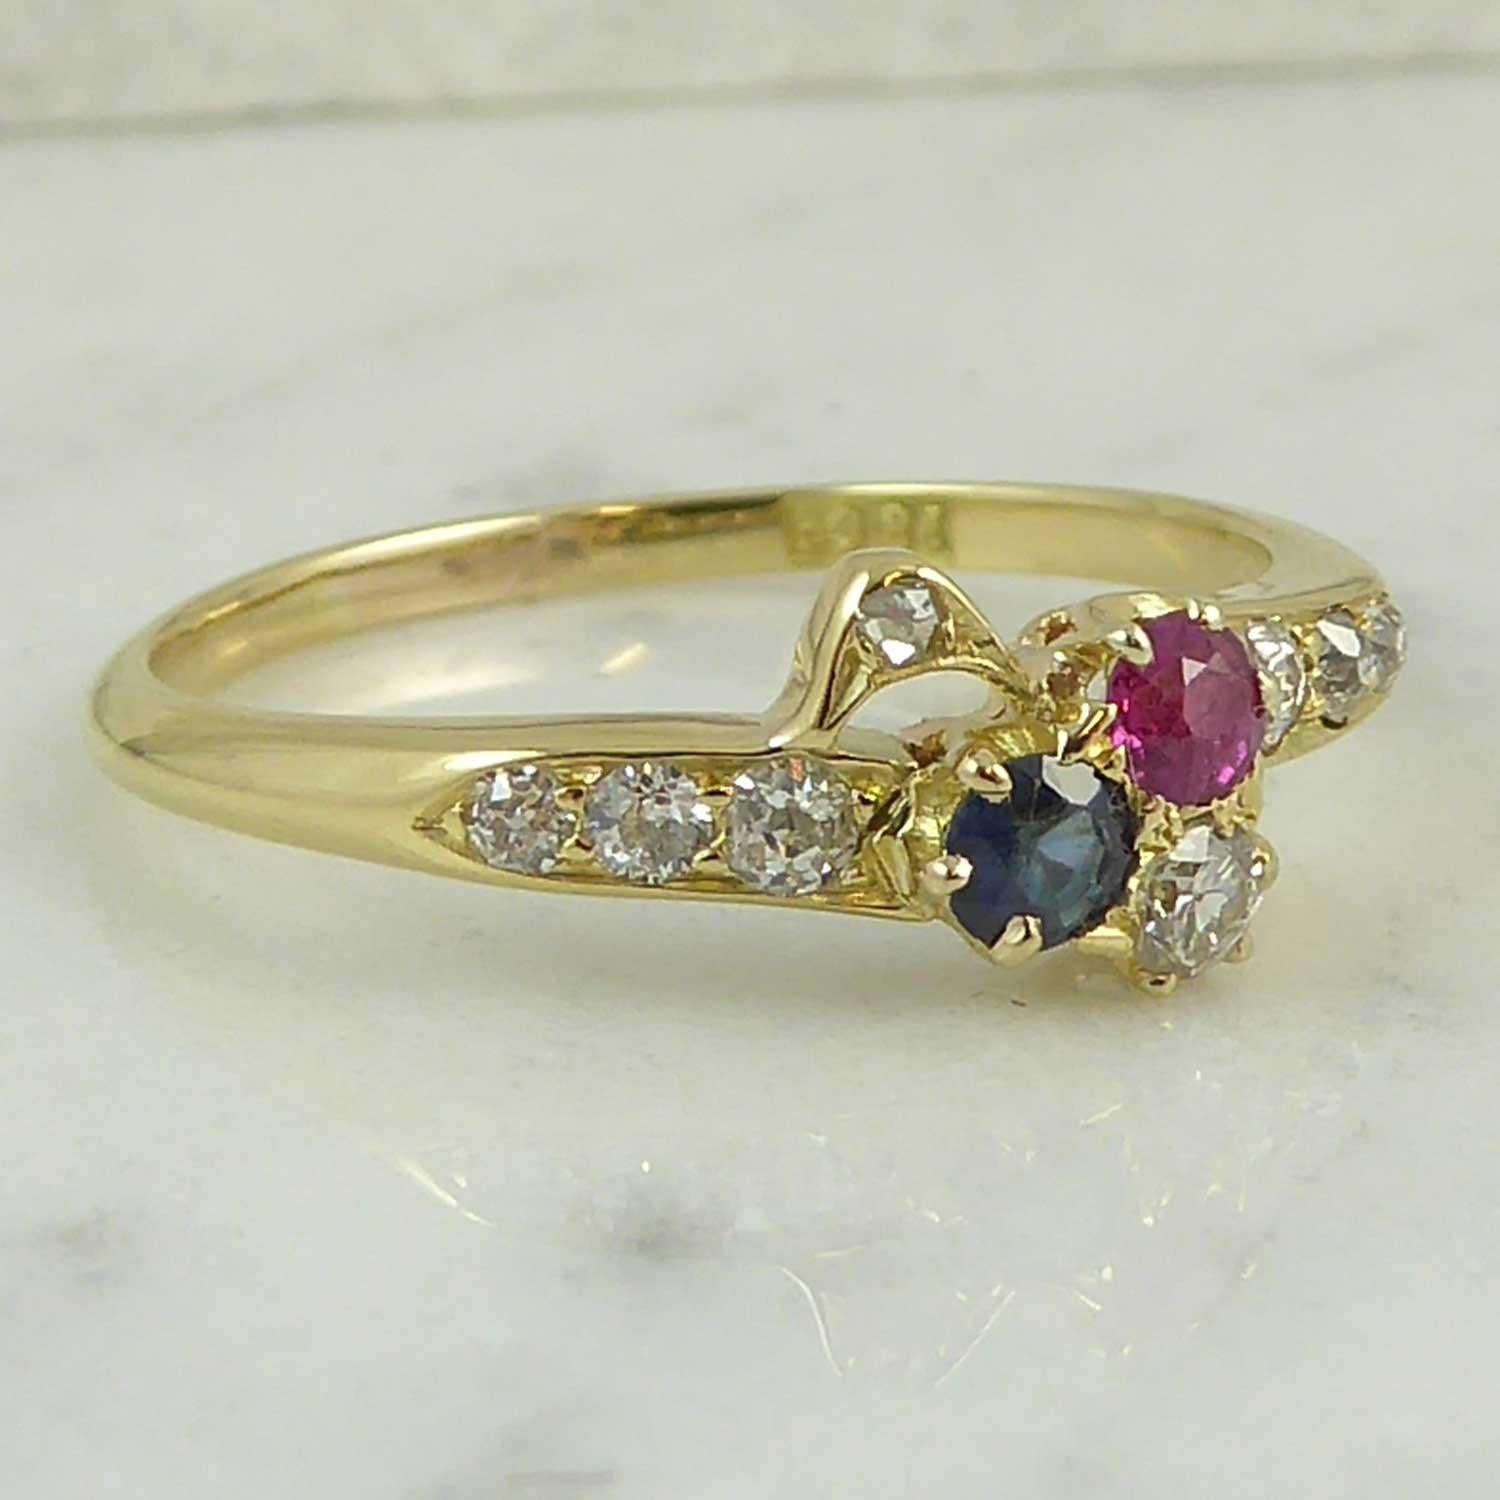 This antique ring is such a sweet design.  Set with gemstone in the colours red, white and blue, this type of ring is often known as 